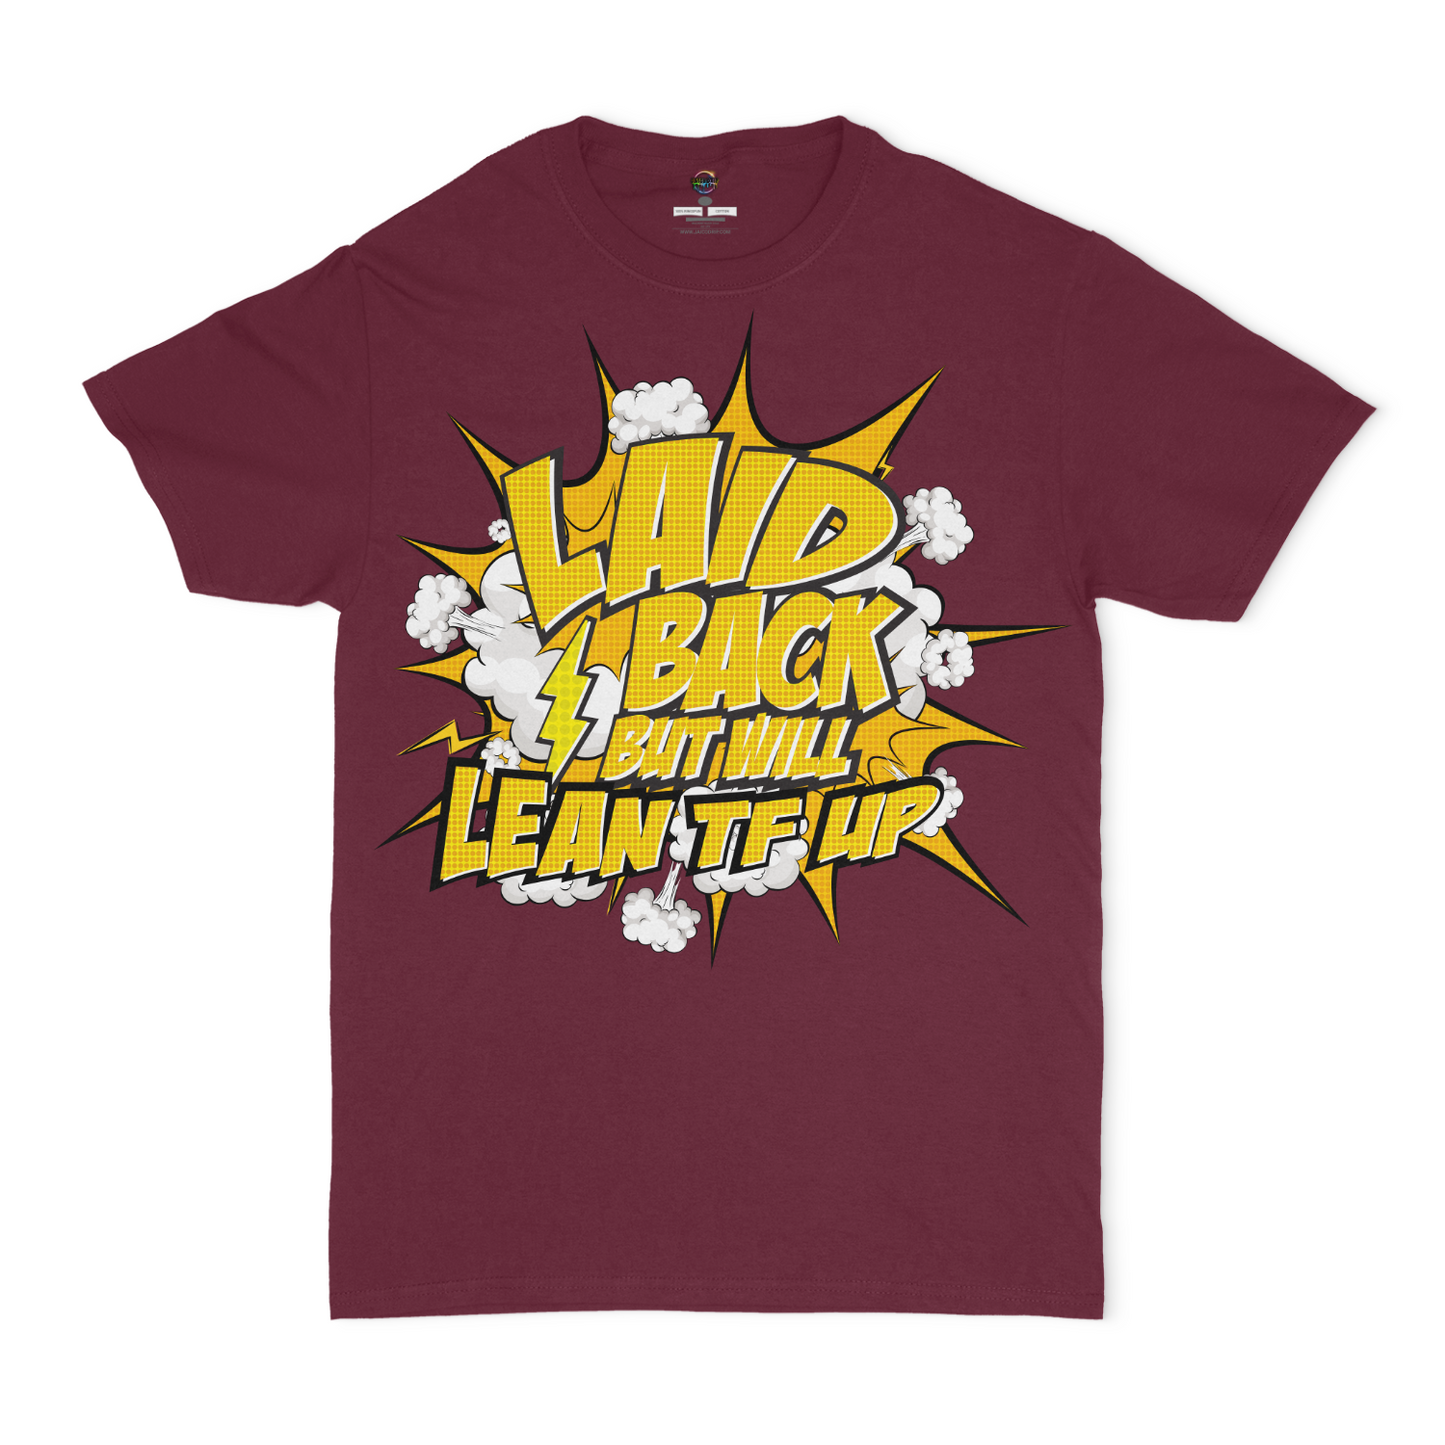 Laid Back, But Will Lean TF Up Graphic Unisex T-shirt